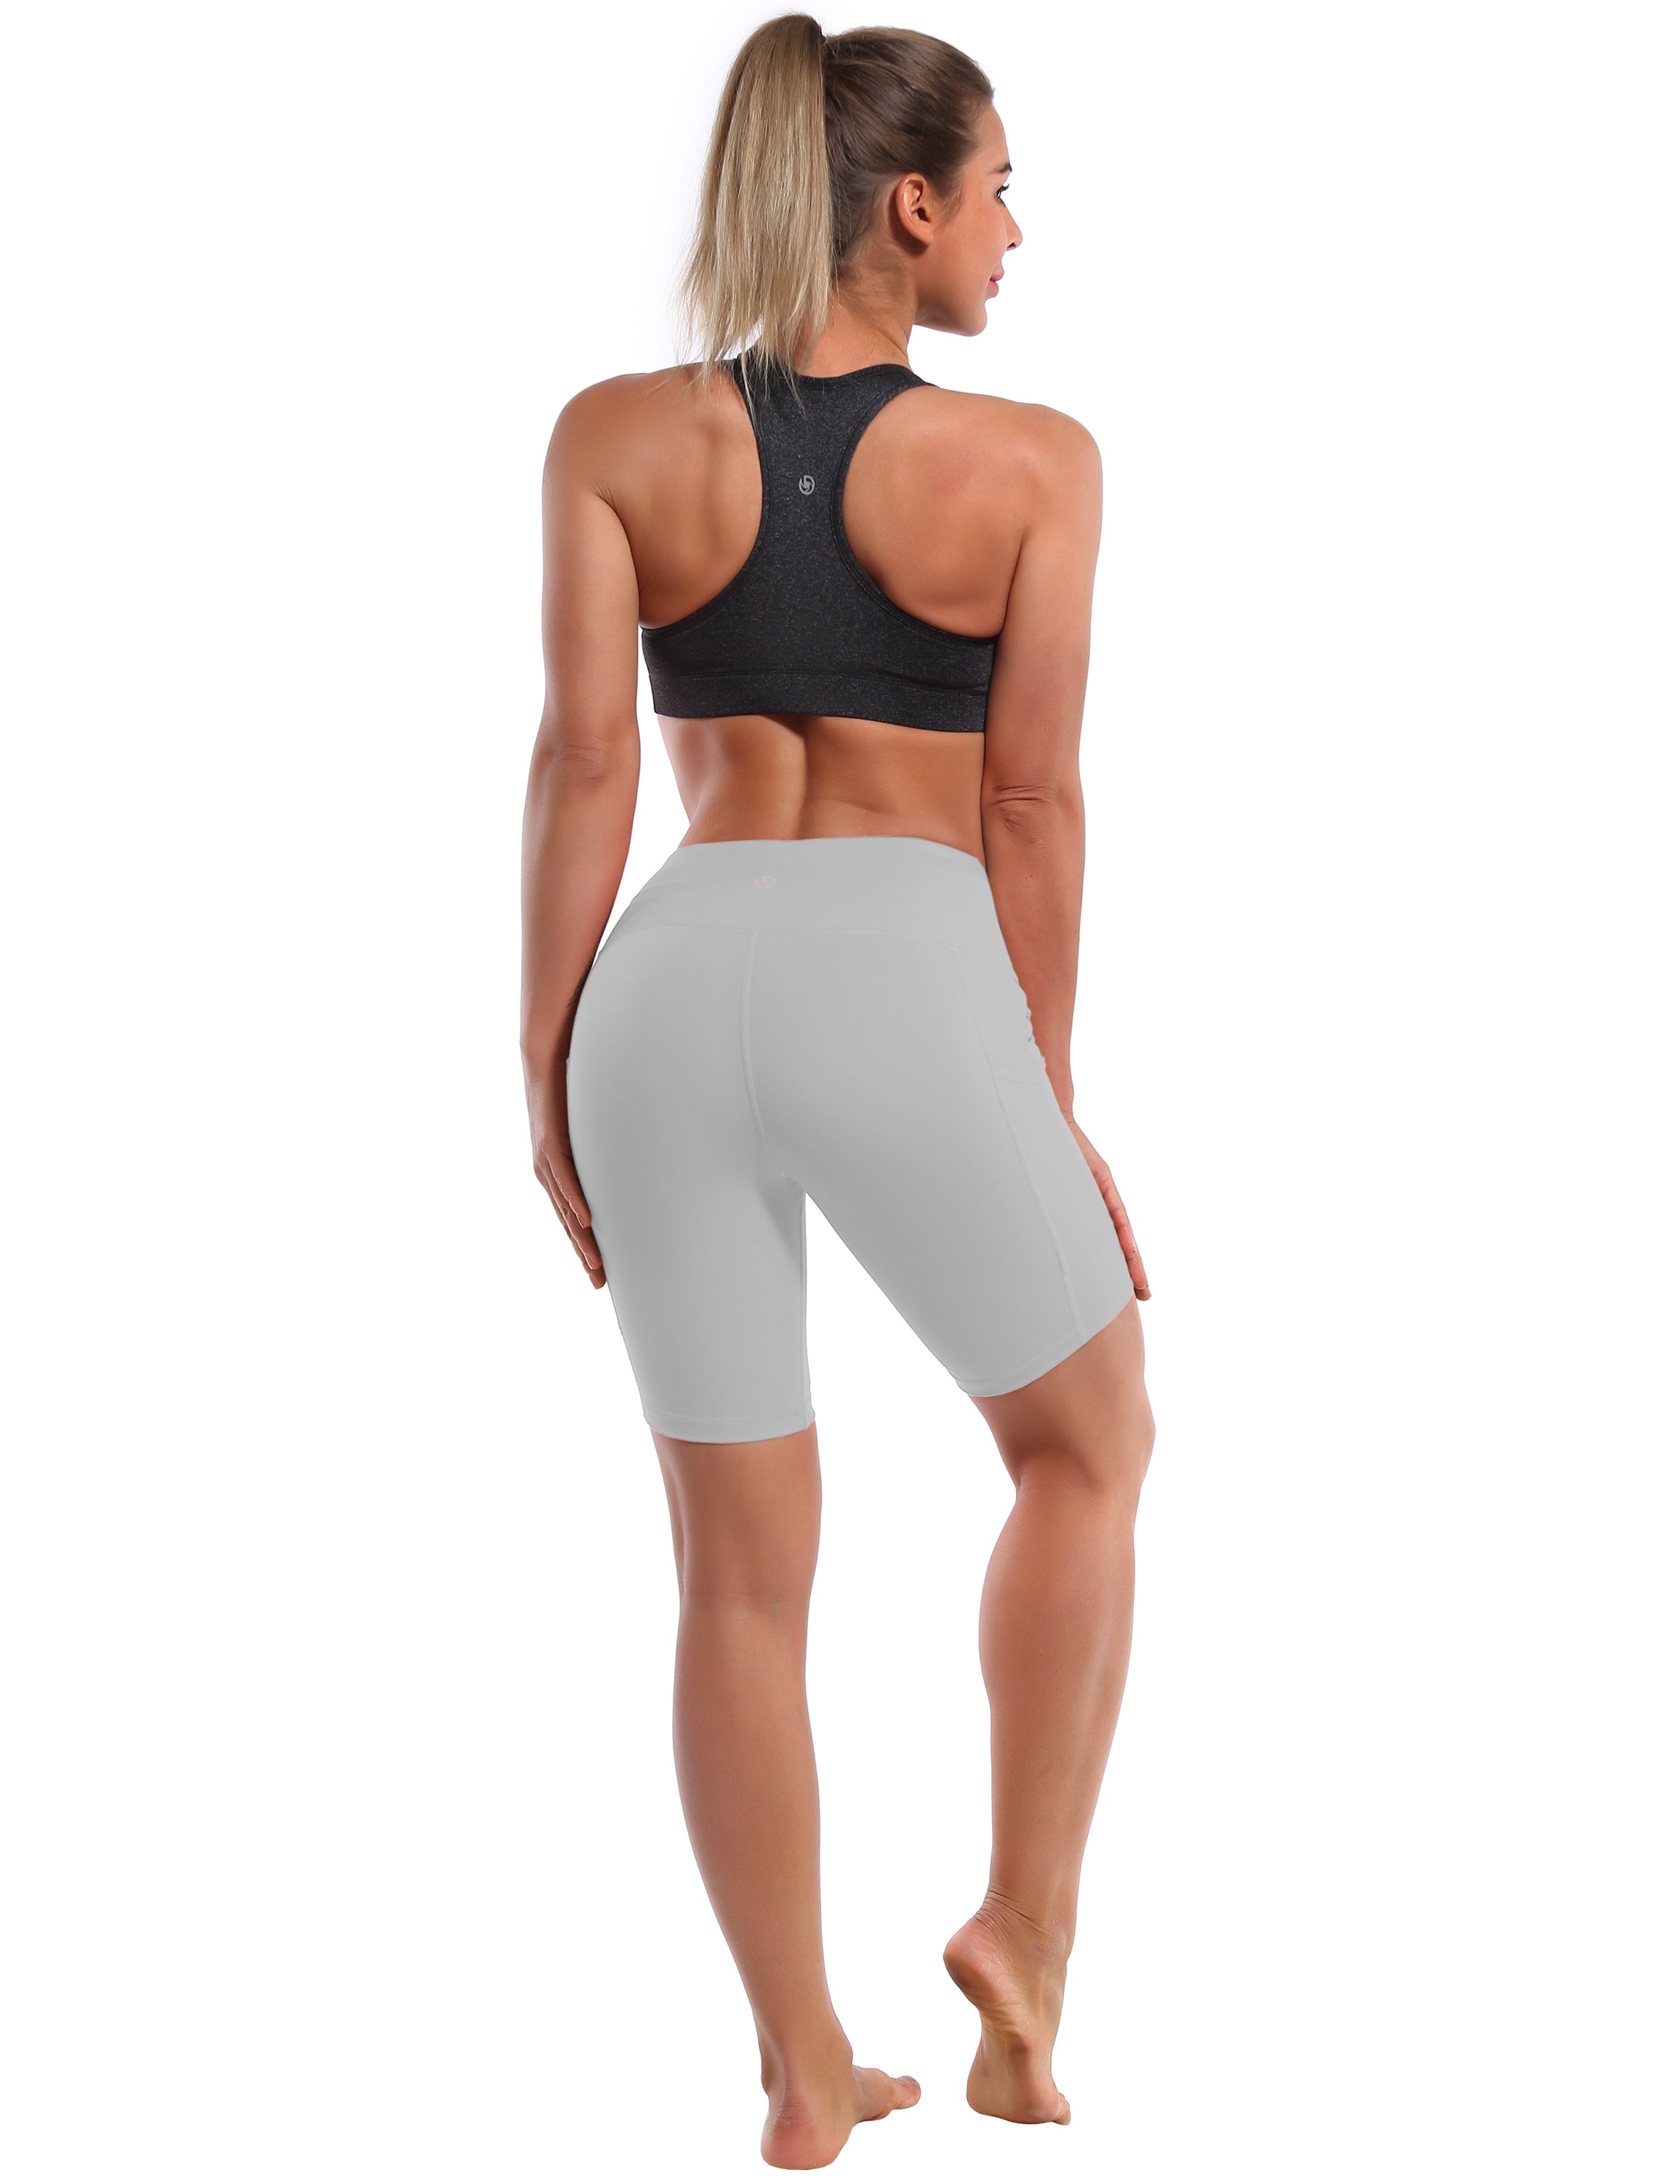 8" Side Pockets yogastudio Shorts lightgray Sleek, soft, smooth and totally comfortable: our newest style is here. Softest-ever fabric High elasticity High density 4-way stretch Fabric doesn't attract lint easily No see-through Moisture-wicking Machine wash 75% Nylon, 25% Spandex